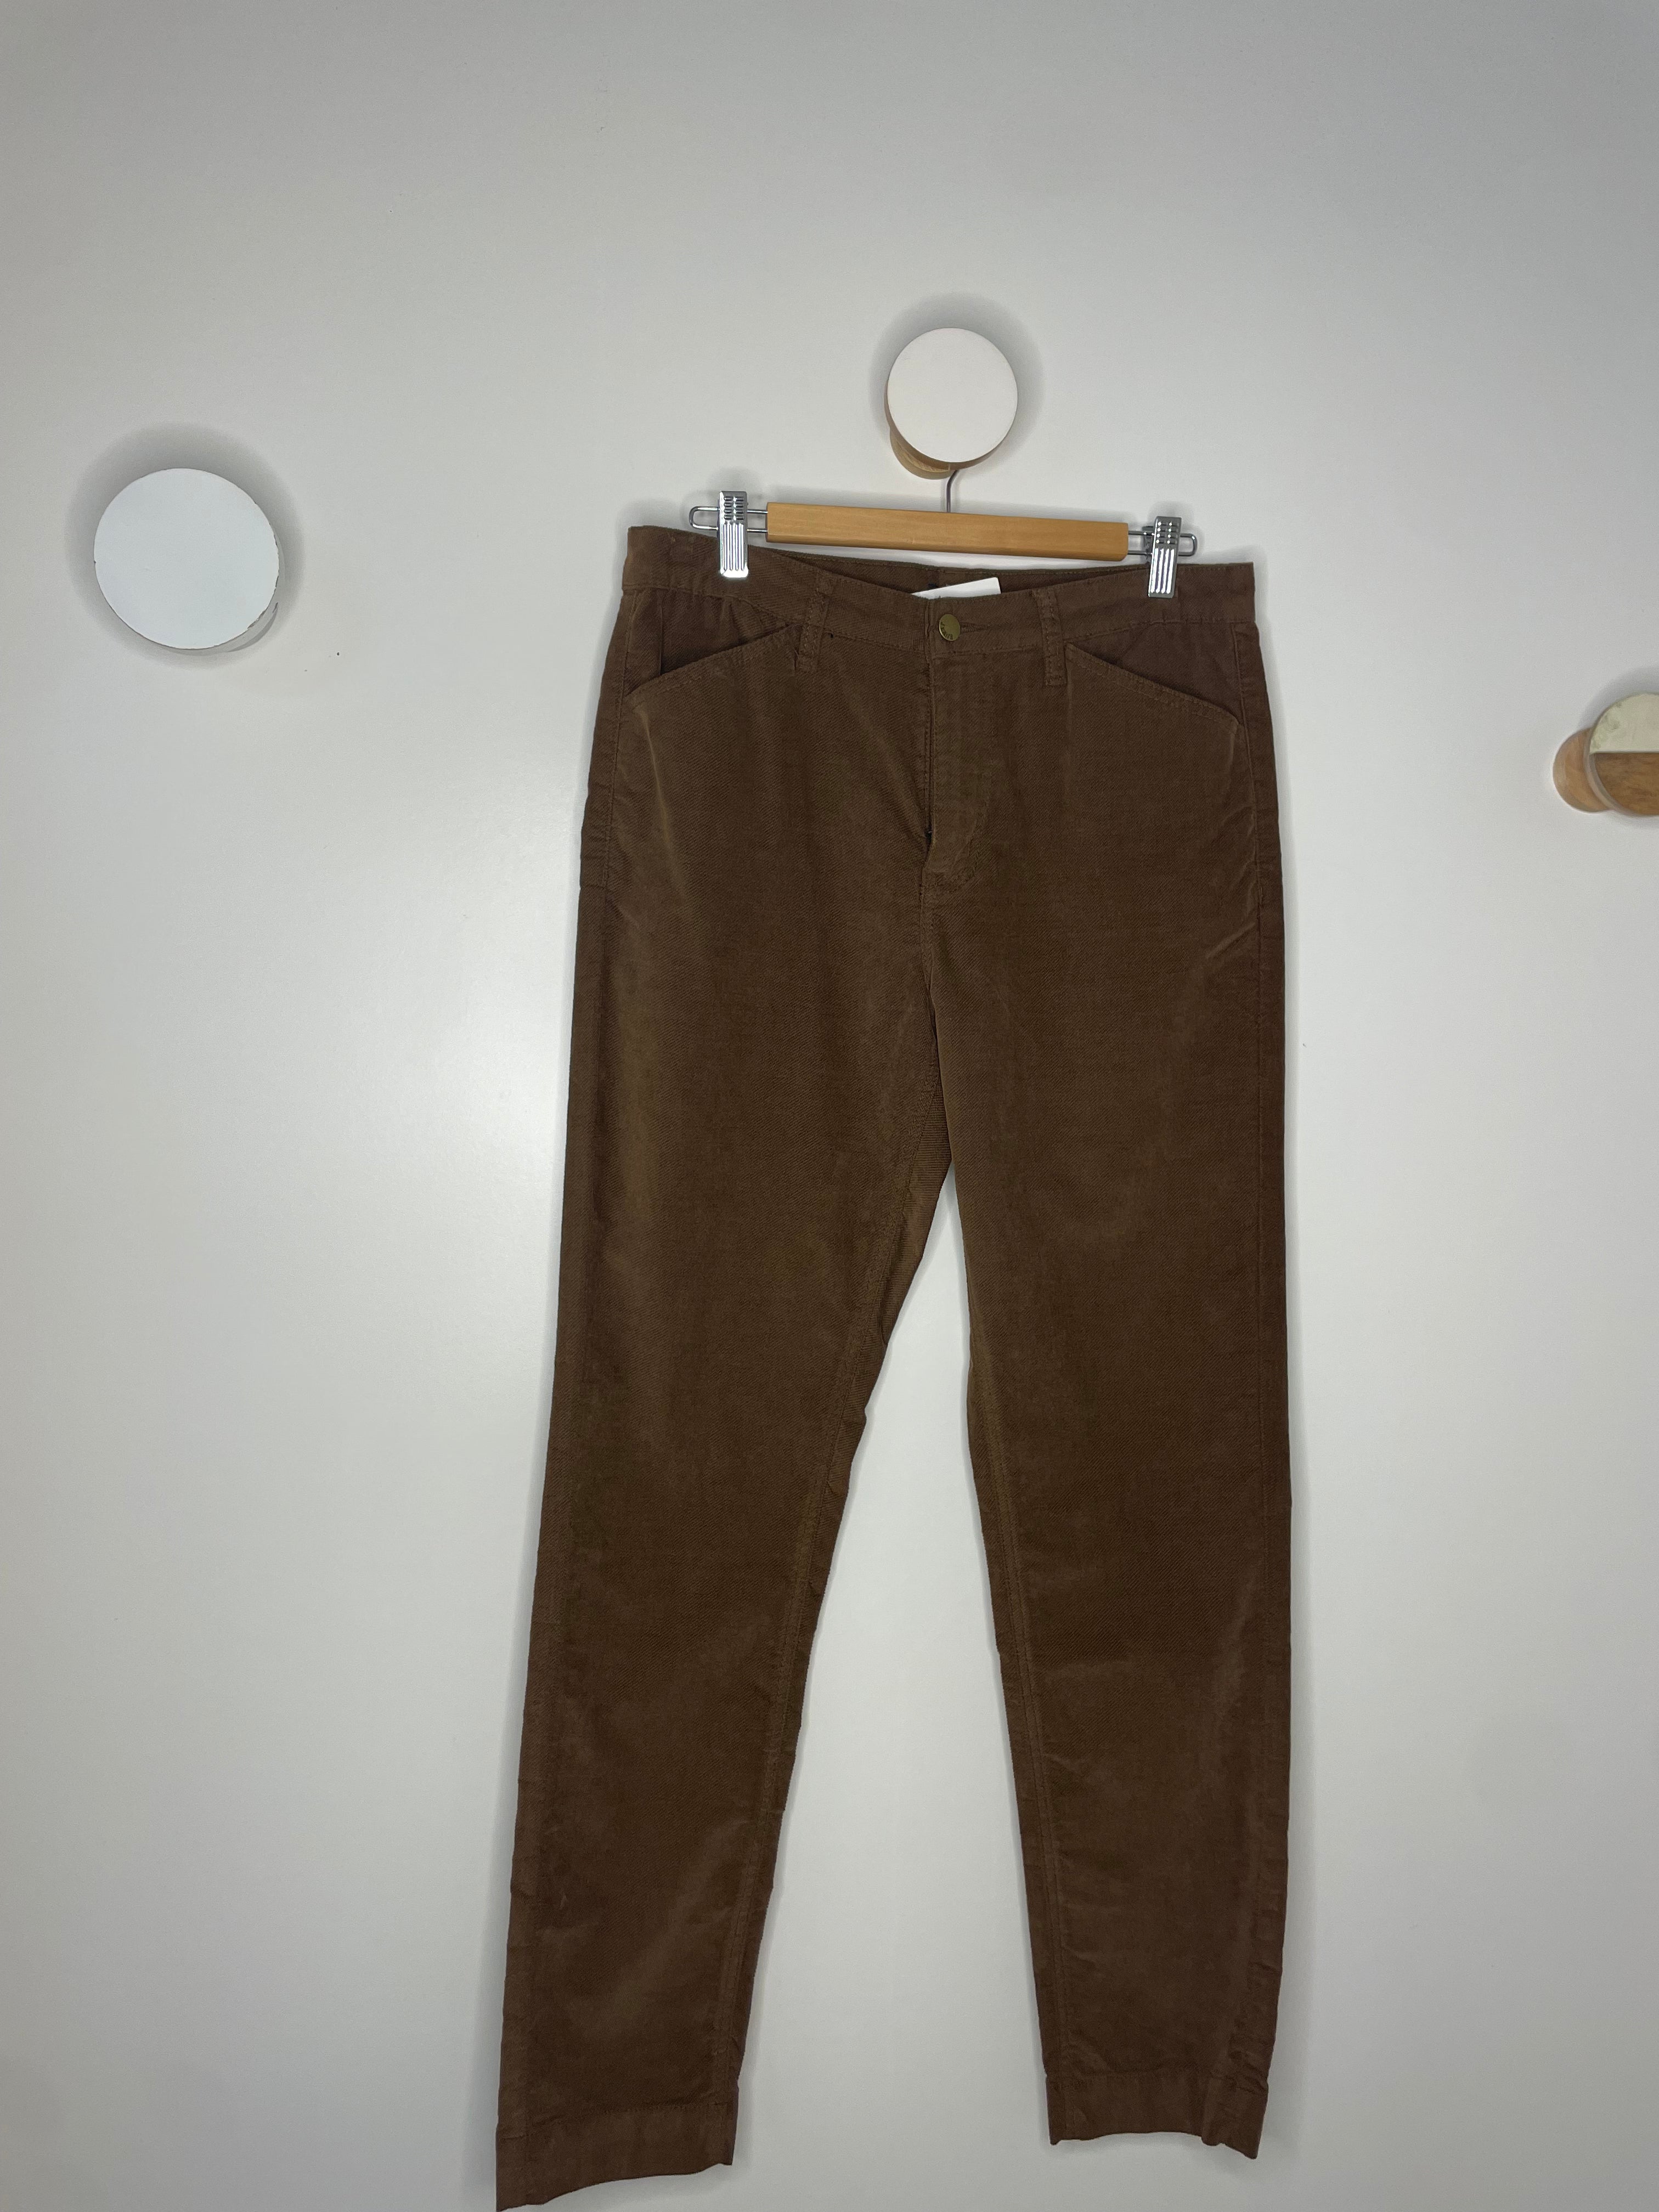 Fitted Pant in Chocolate